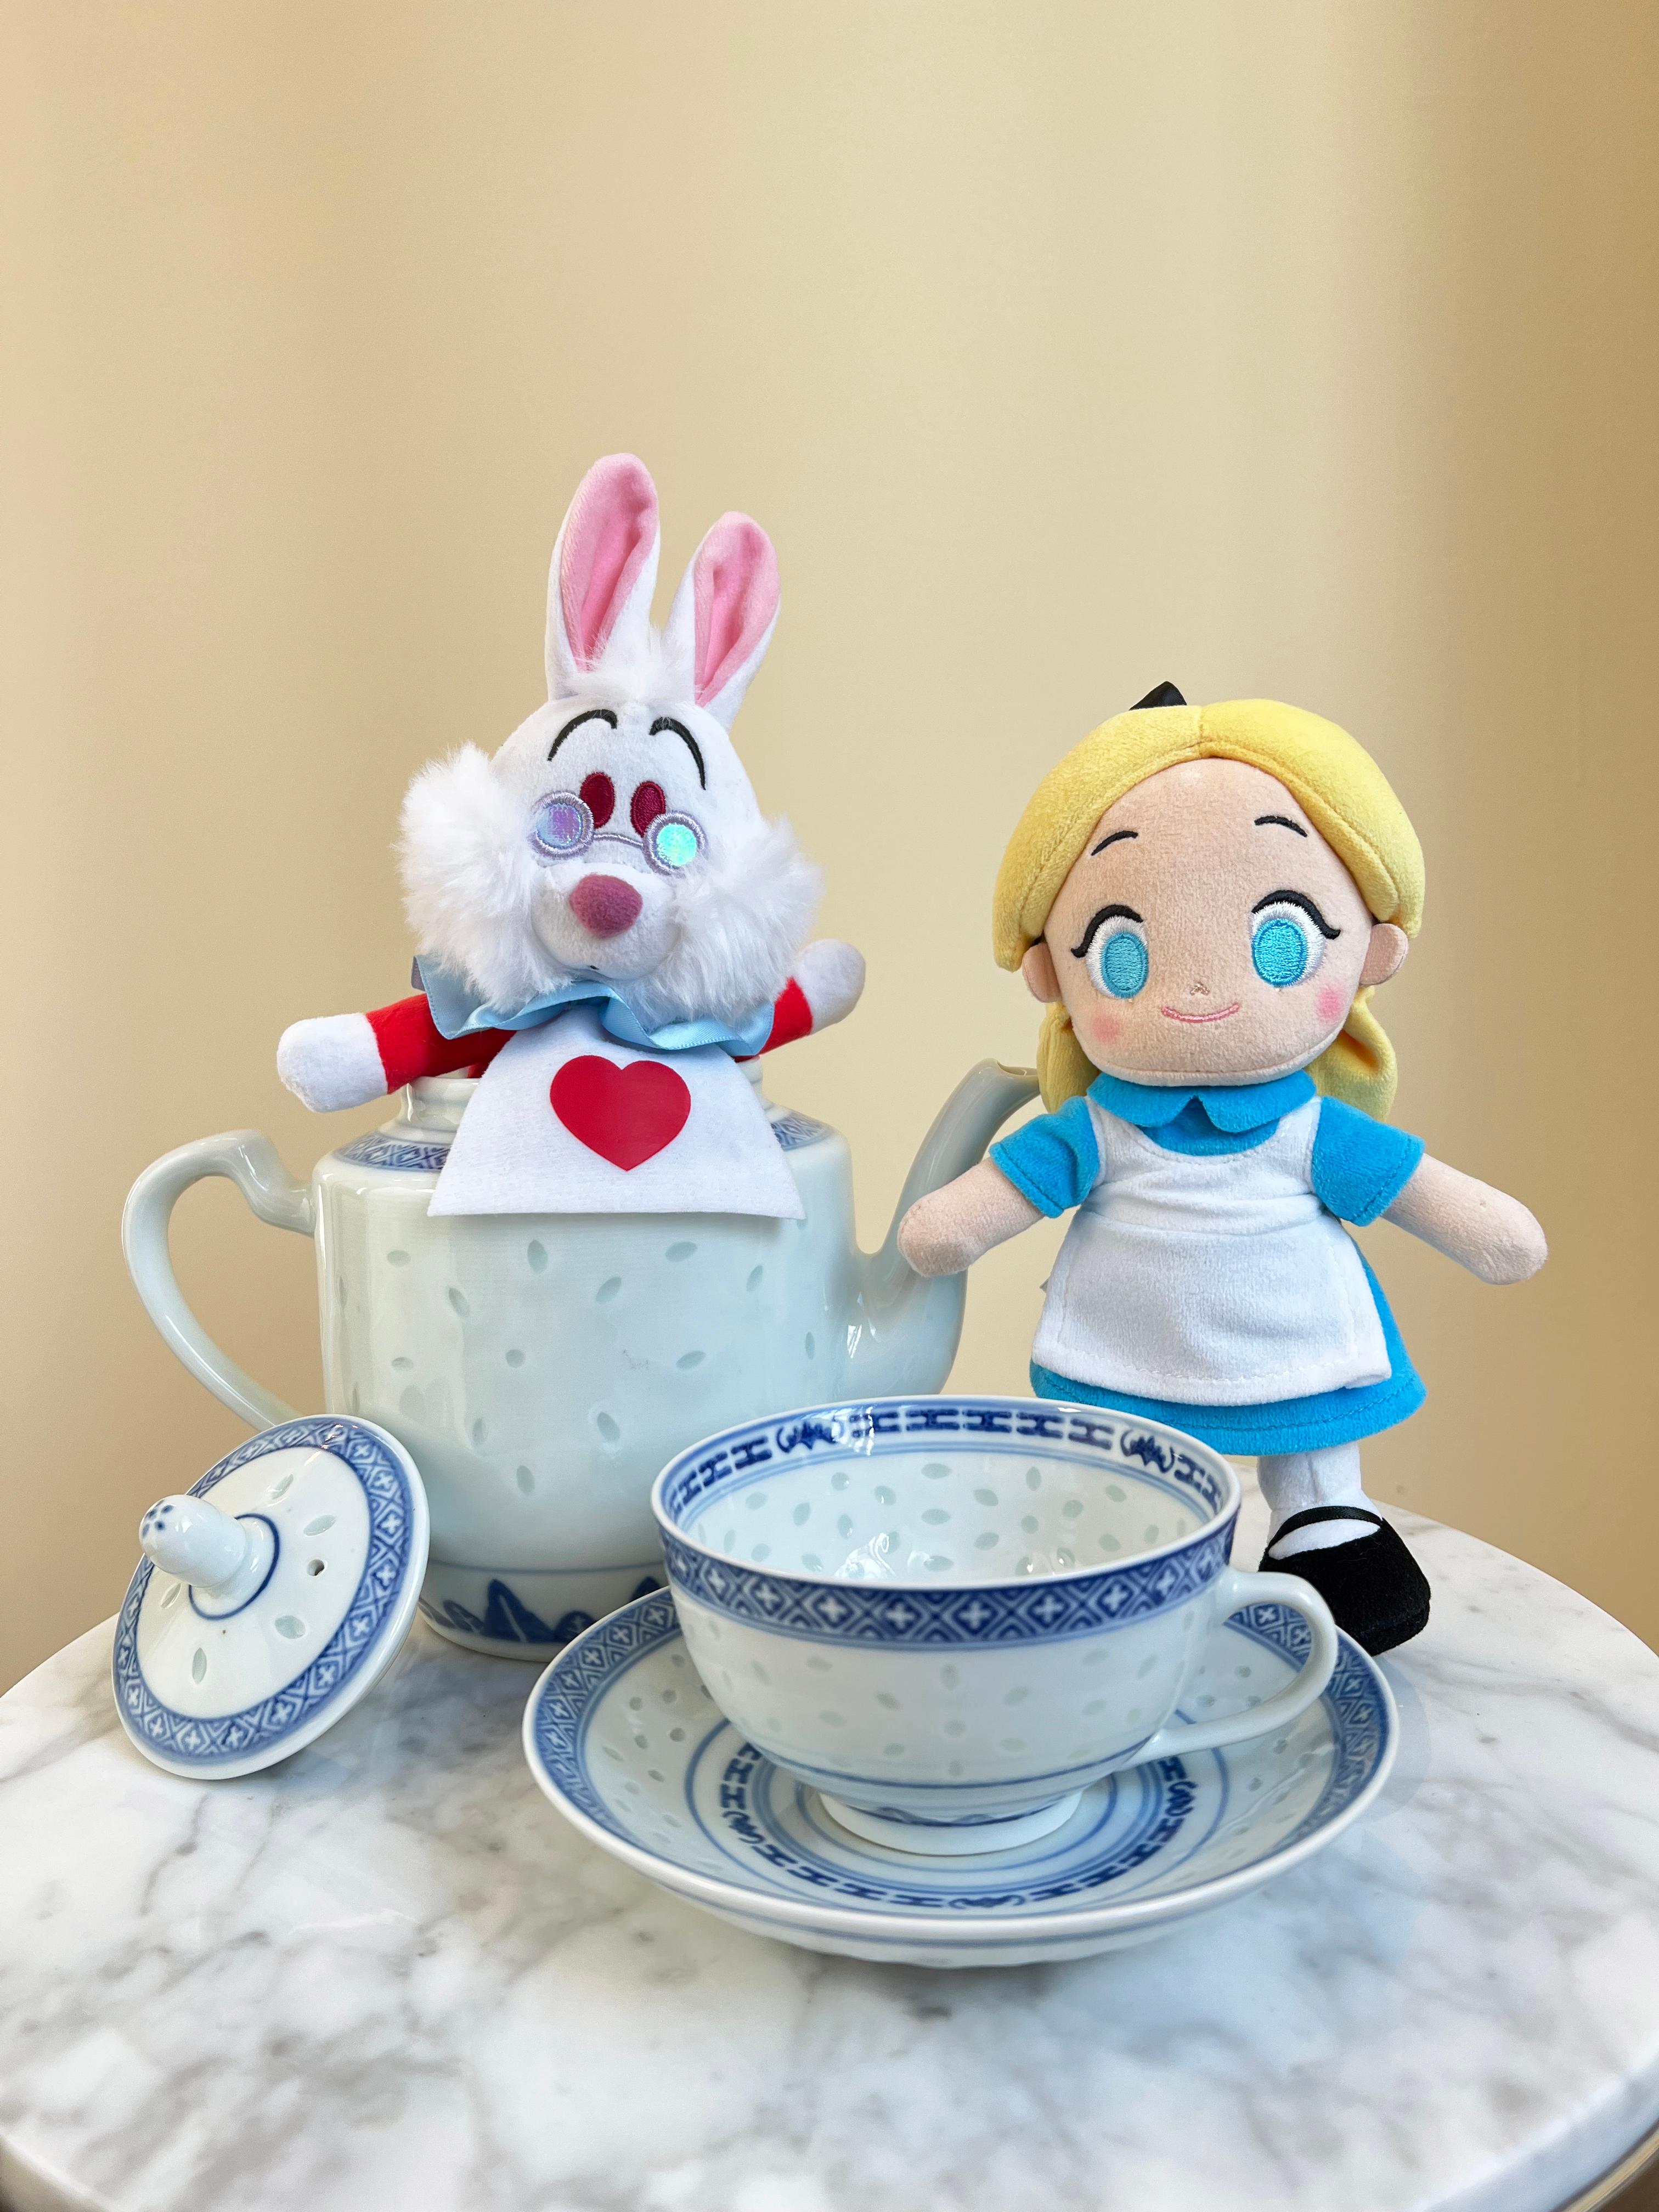 Alice in Wonderland and the White Rabbit NuiMOs Plush with teacups 